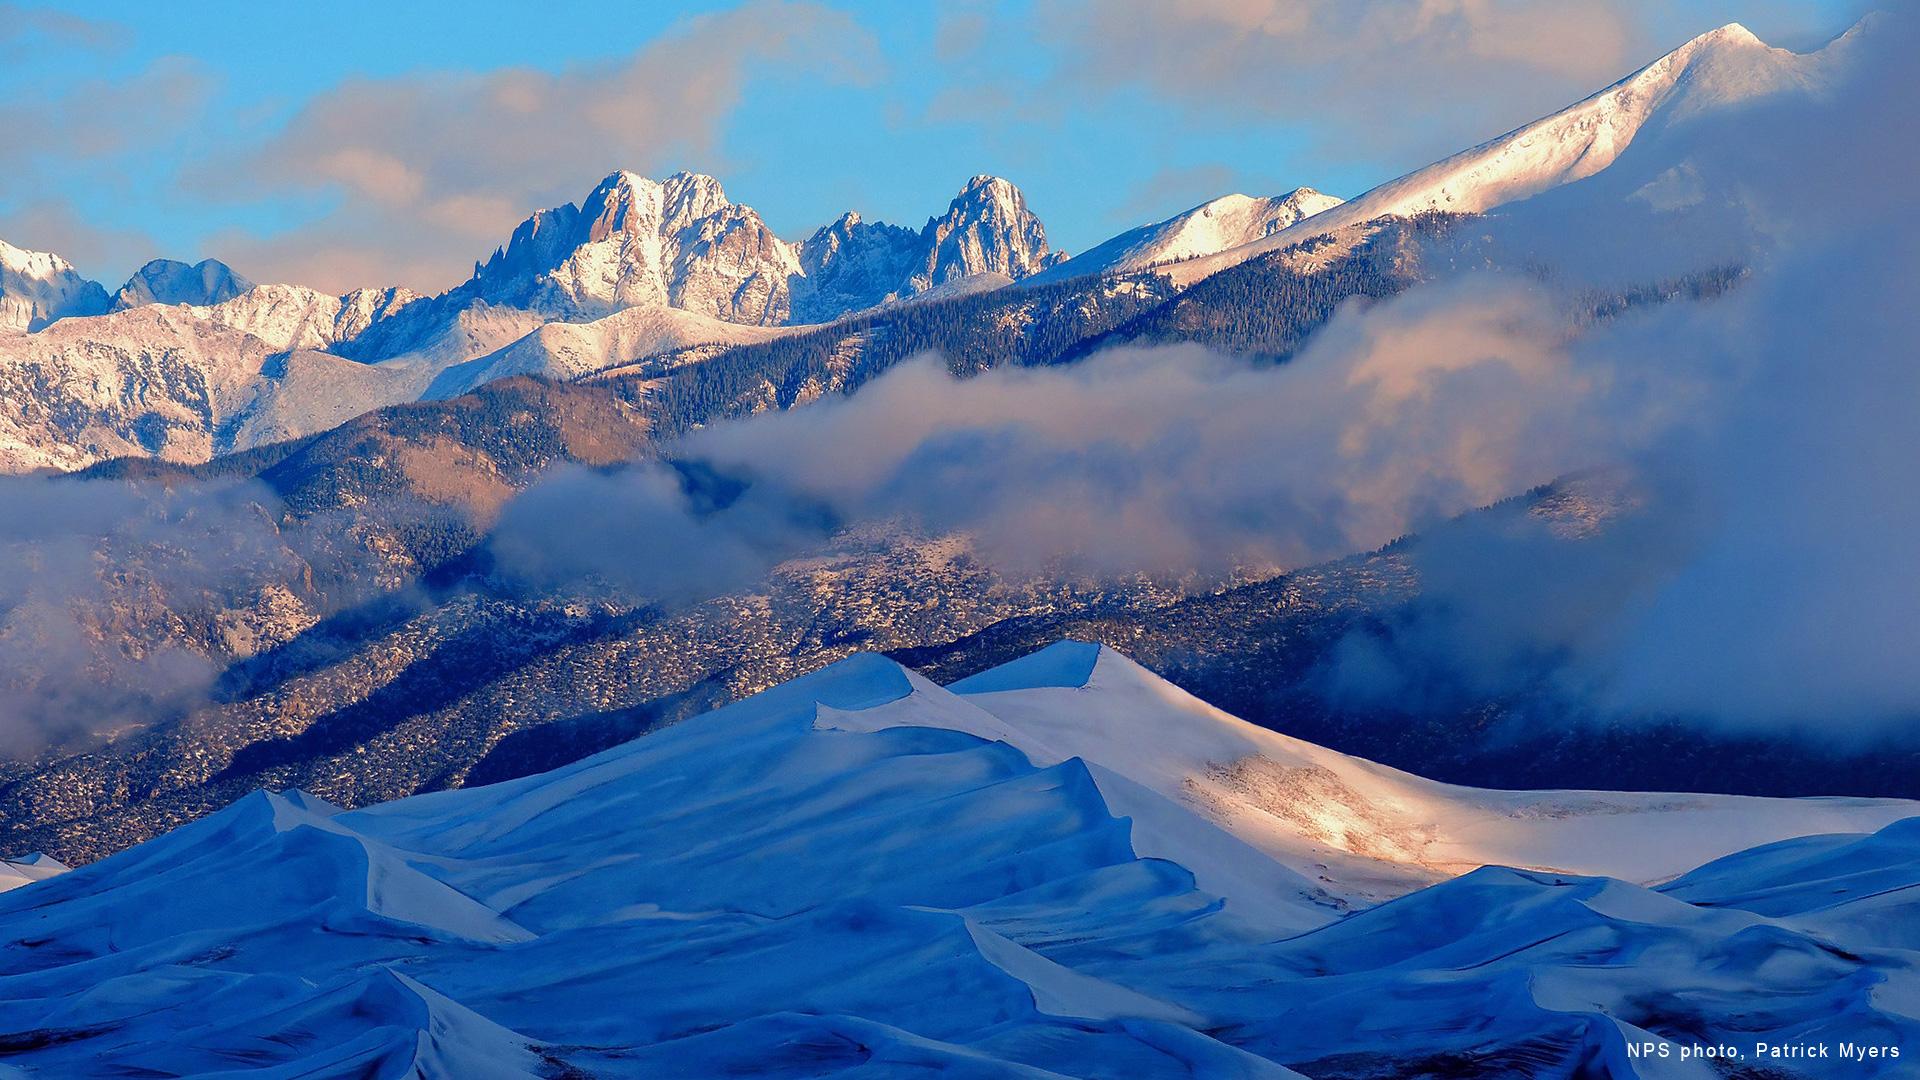 An image of a range of snowy mountains, NPS photo, by Patrick Myers